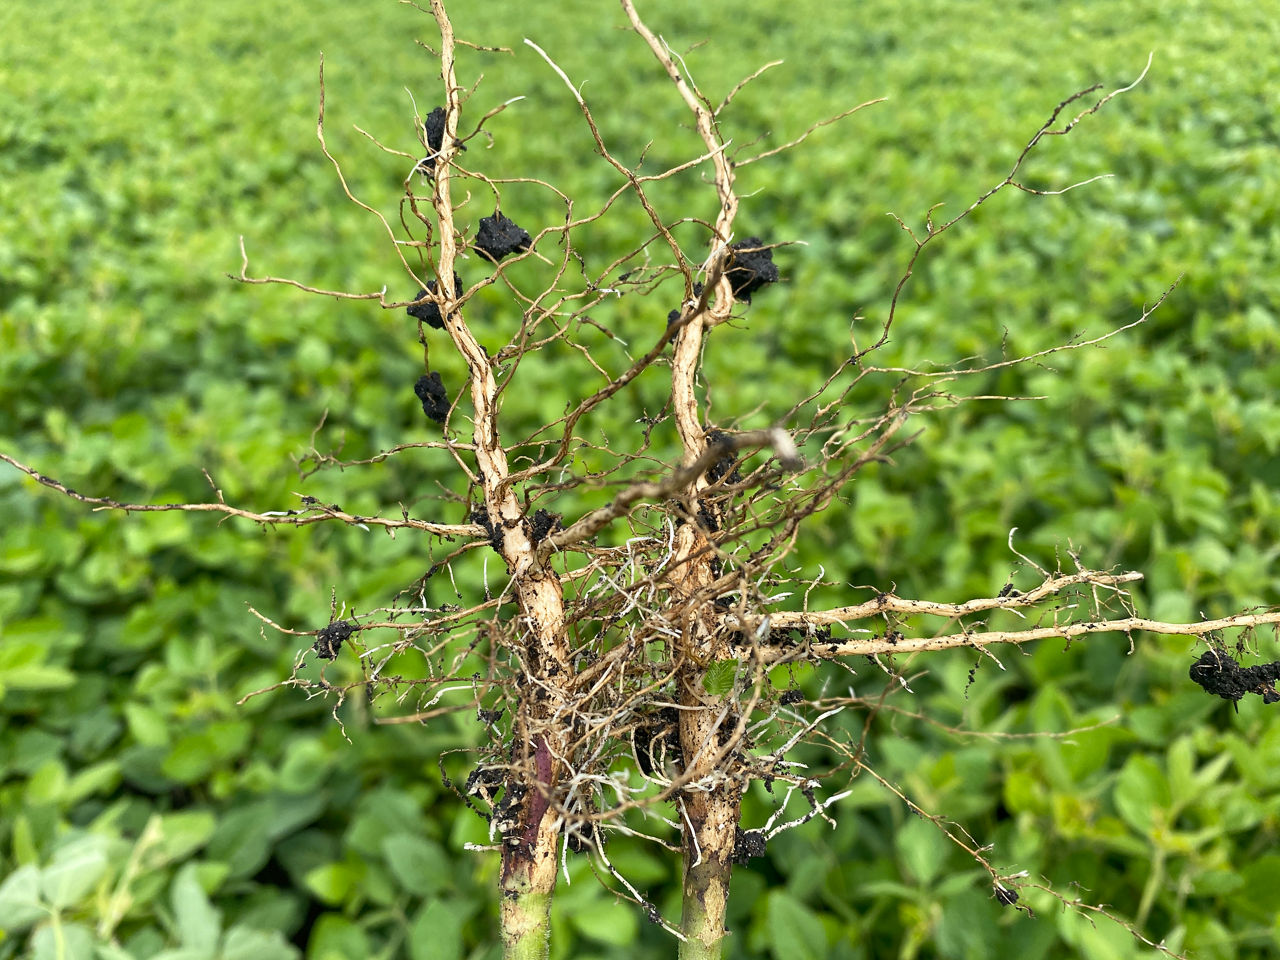  Figure 3. Soybean roots with poor nodulation. Photo courtesy of Manitoba Pulse & Soybean Growers.  igure 2. Soybean roots with poor nodulation. Photo courtesy of Manitoba Pulse & Soybean Growers. 